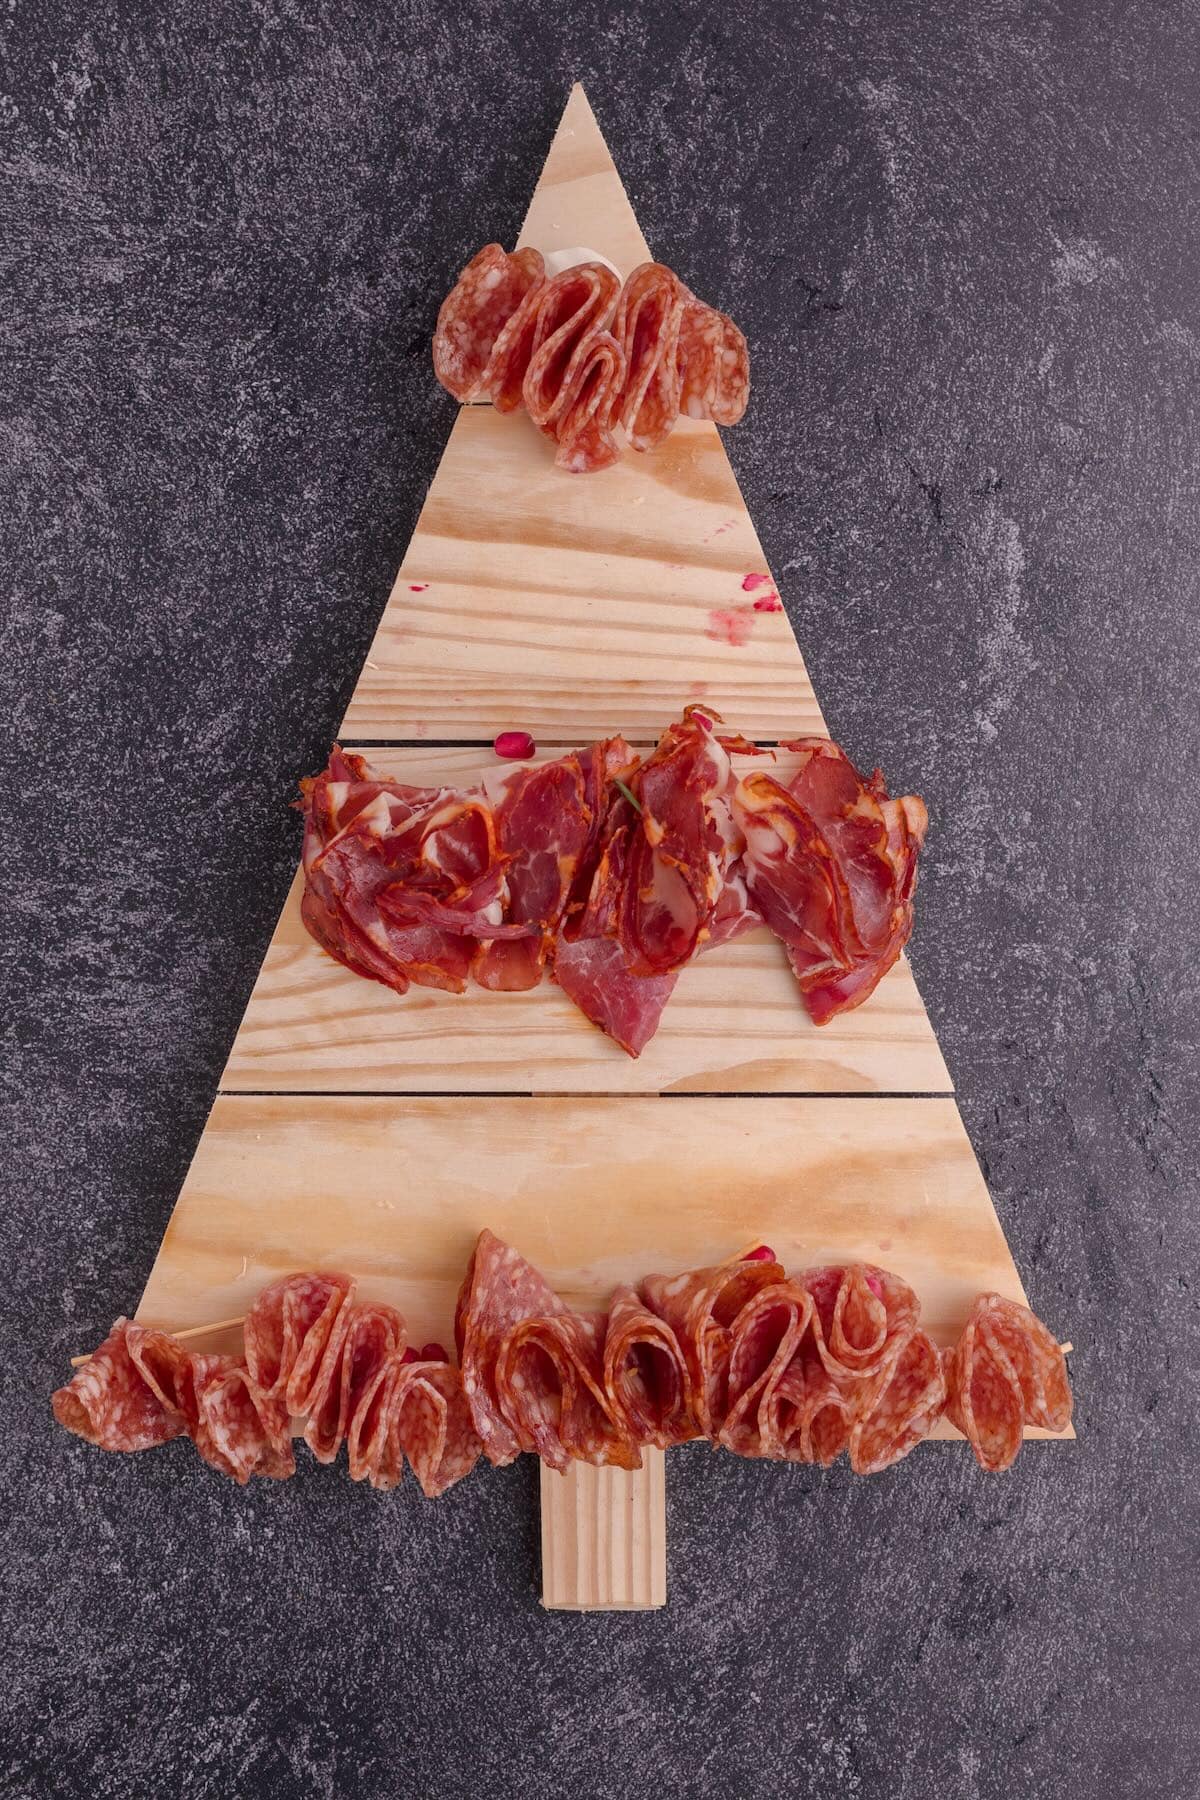 A board cut into the shape of a Christmas tree with three rows of folded meat. 